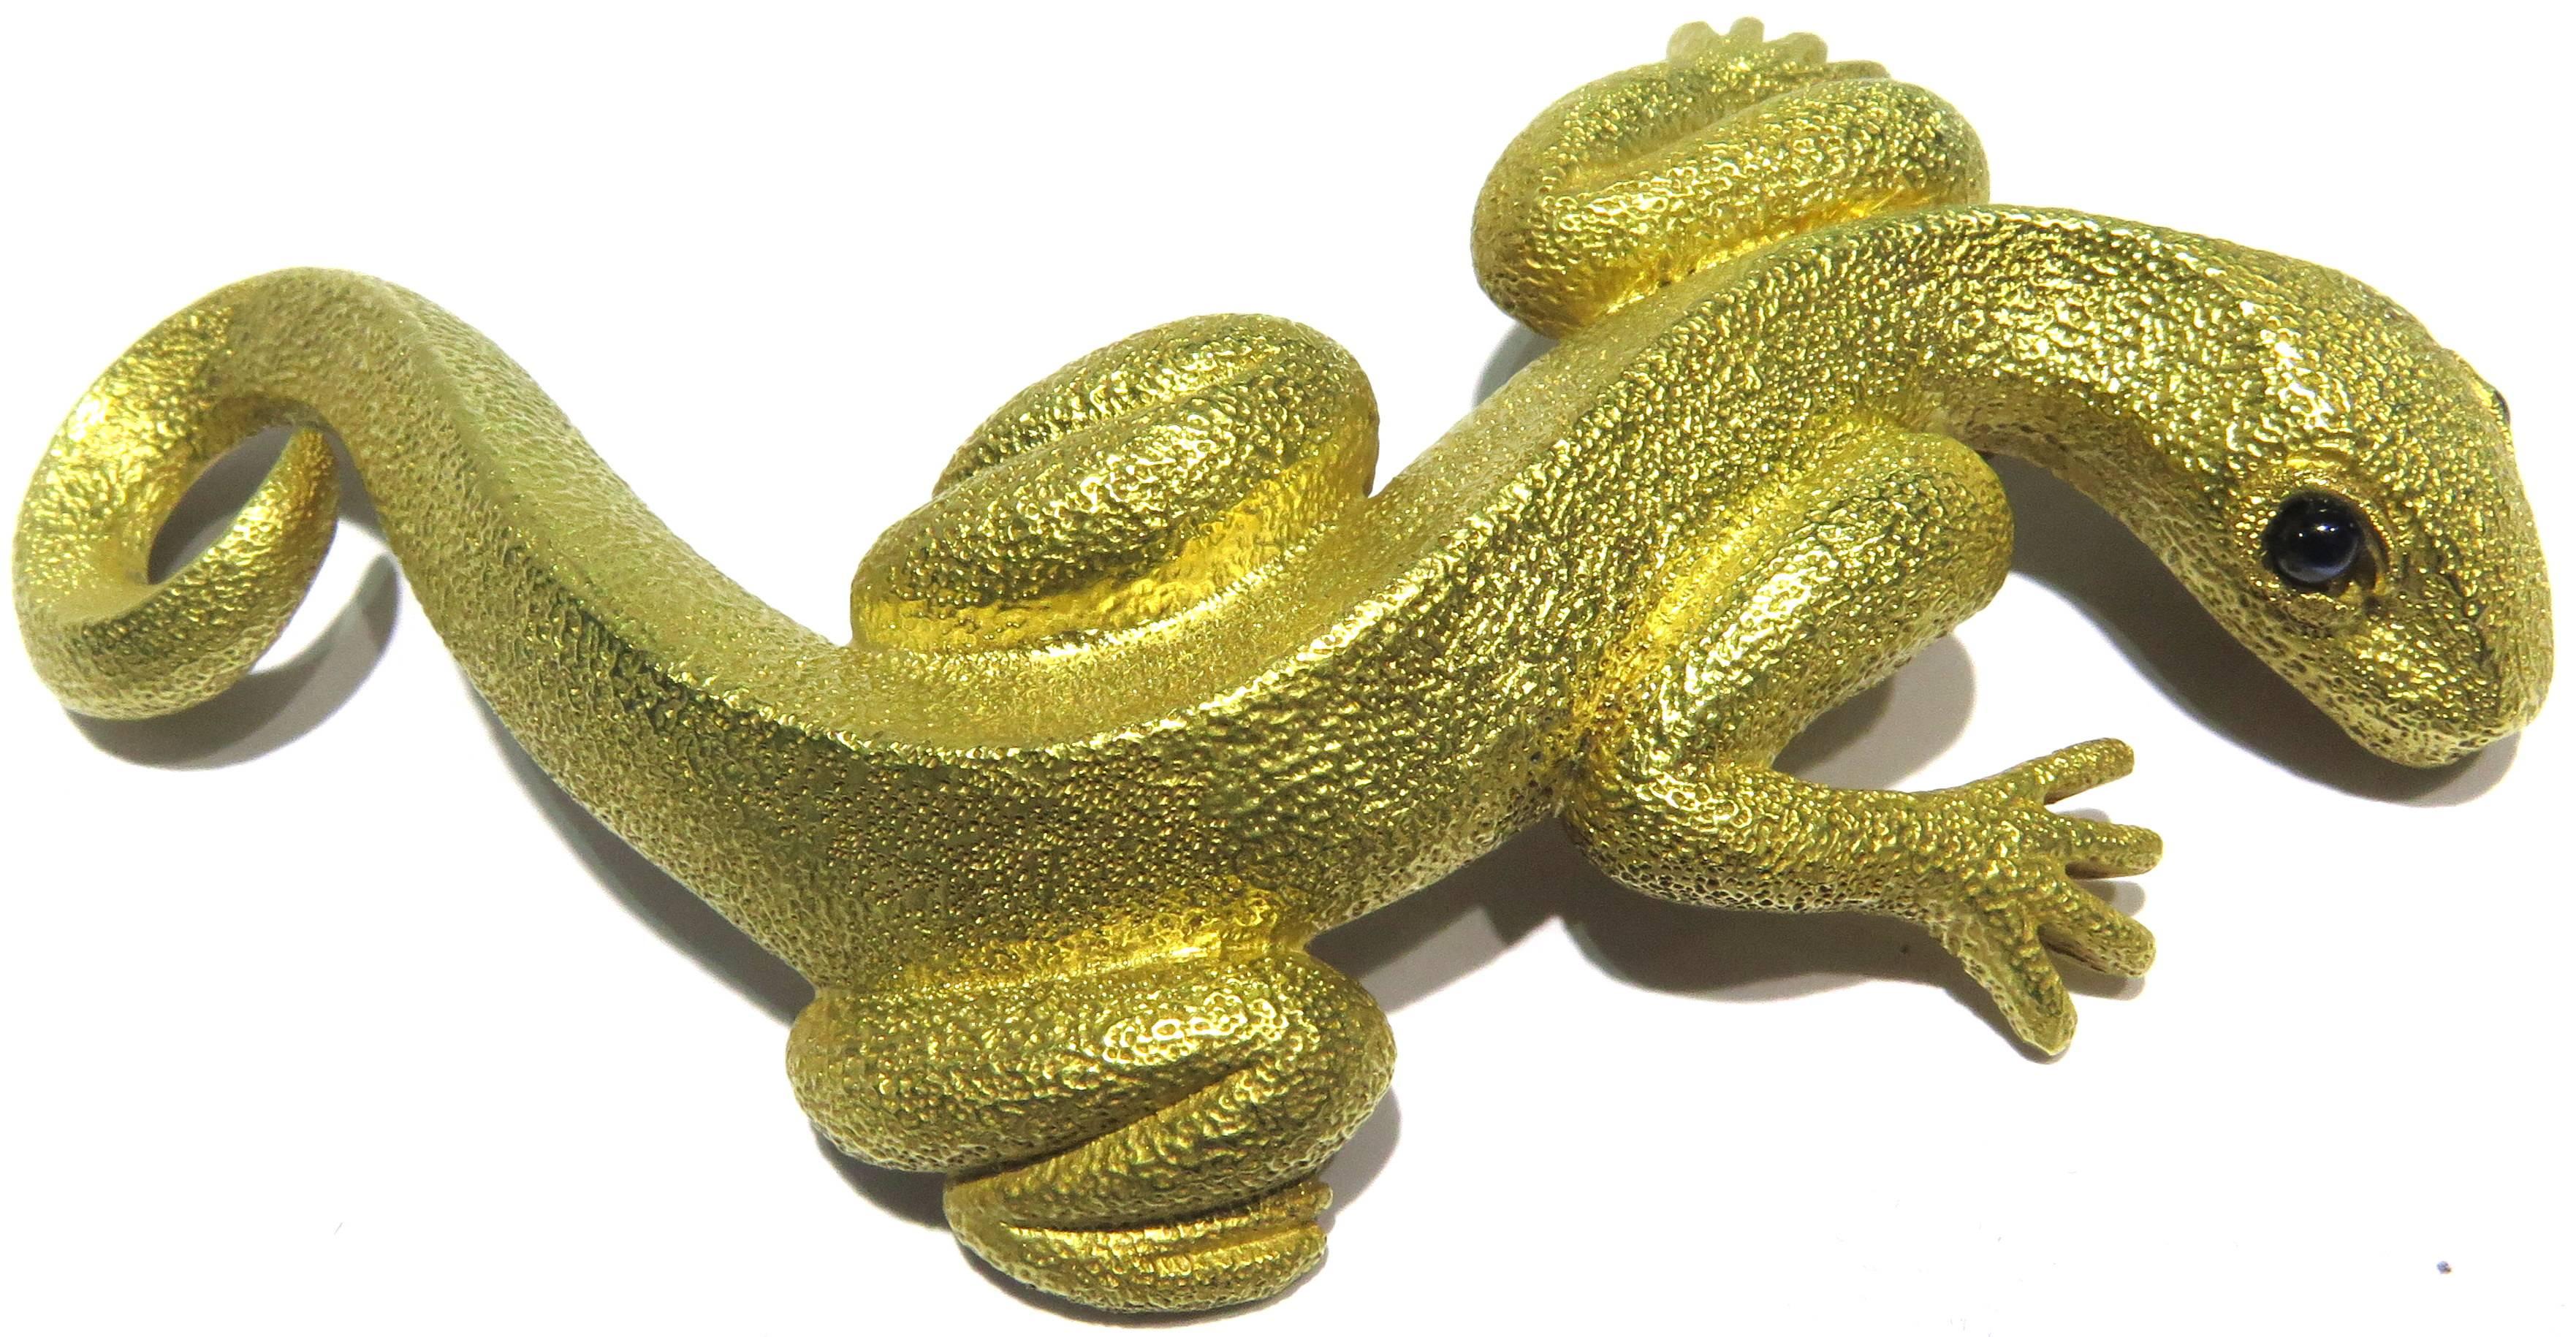 Kieselstein-Cord Enormous Gold Lizard/Salamander Sapphire Pin/Brooch Dated 1990 In Excellent Condition For Sale In Palm Beach, FL